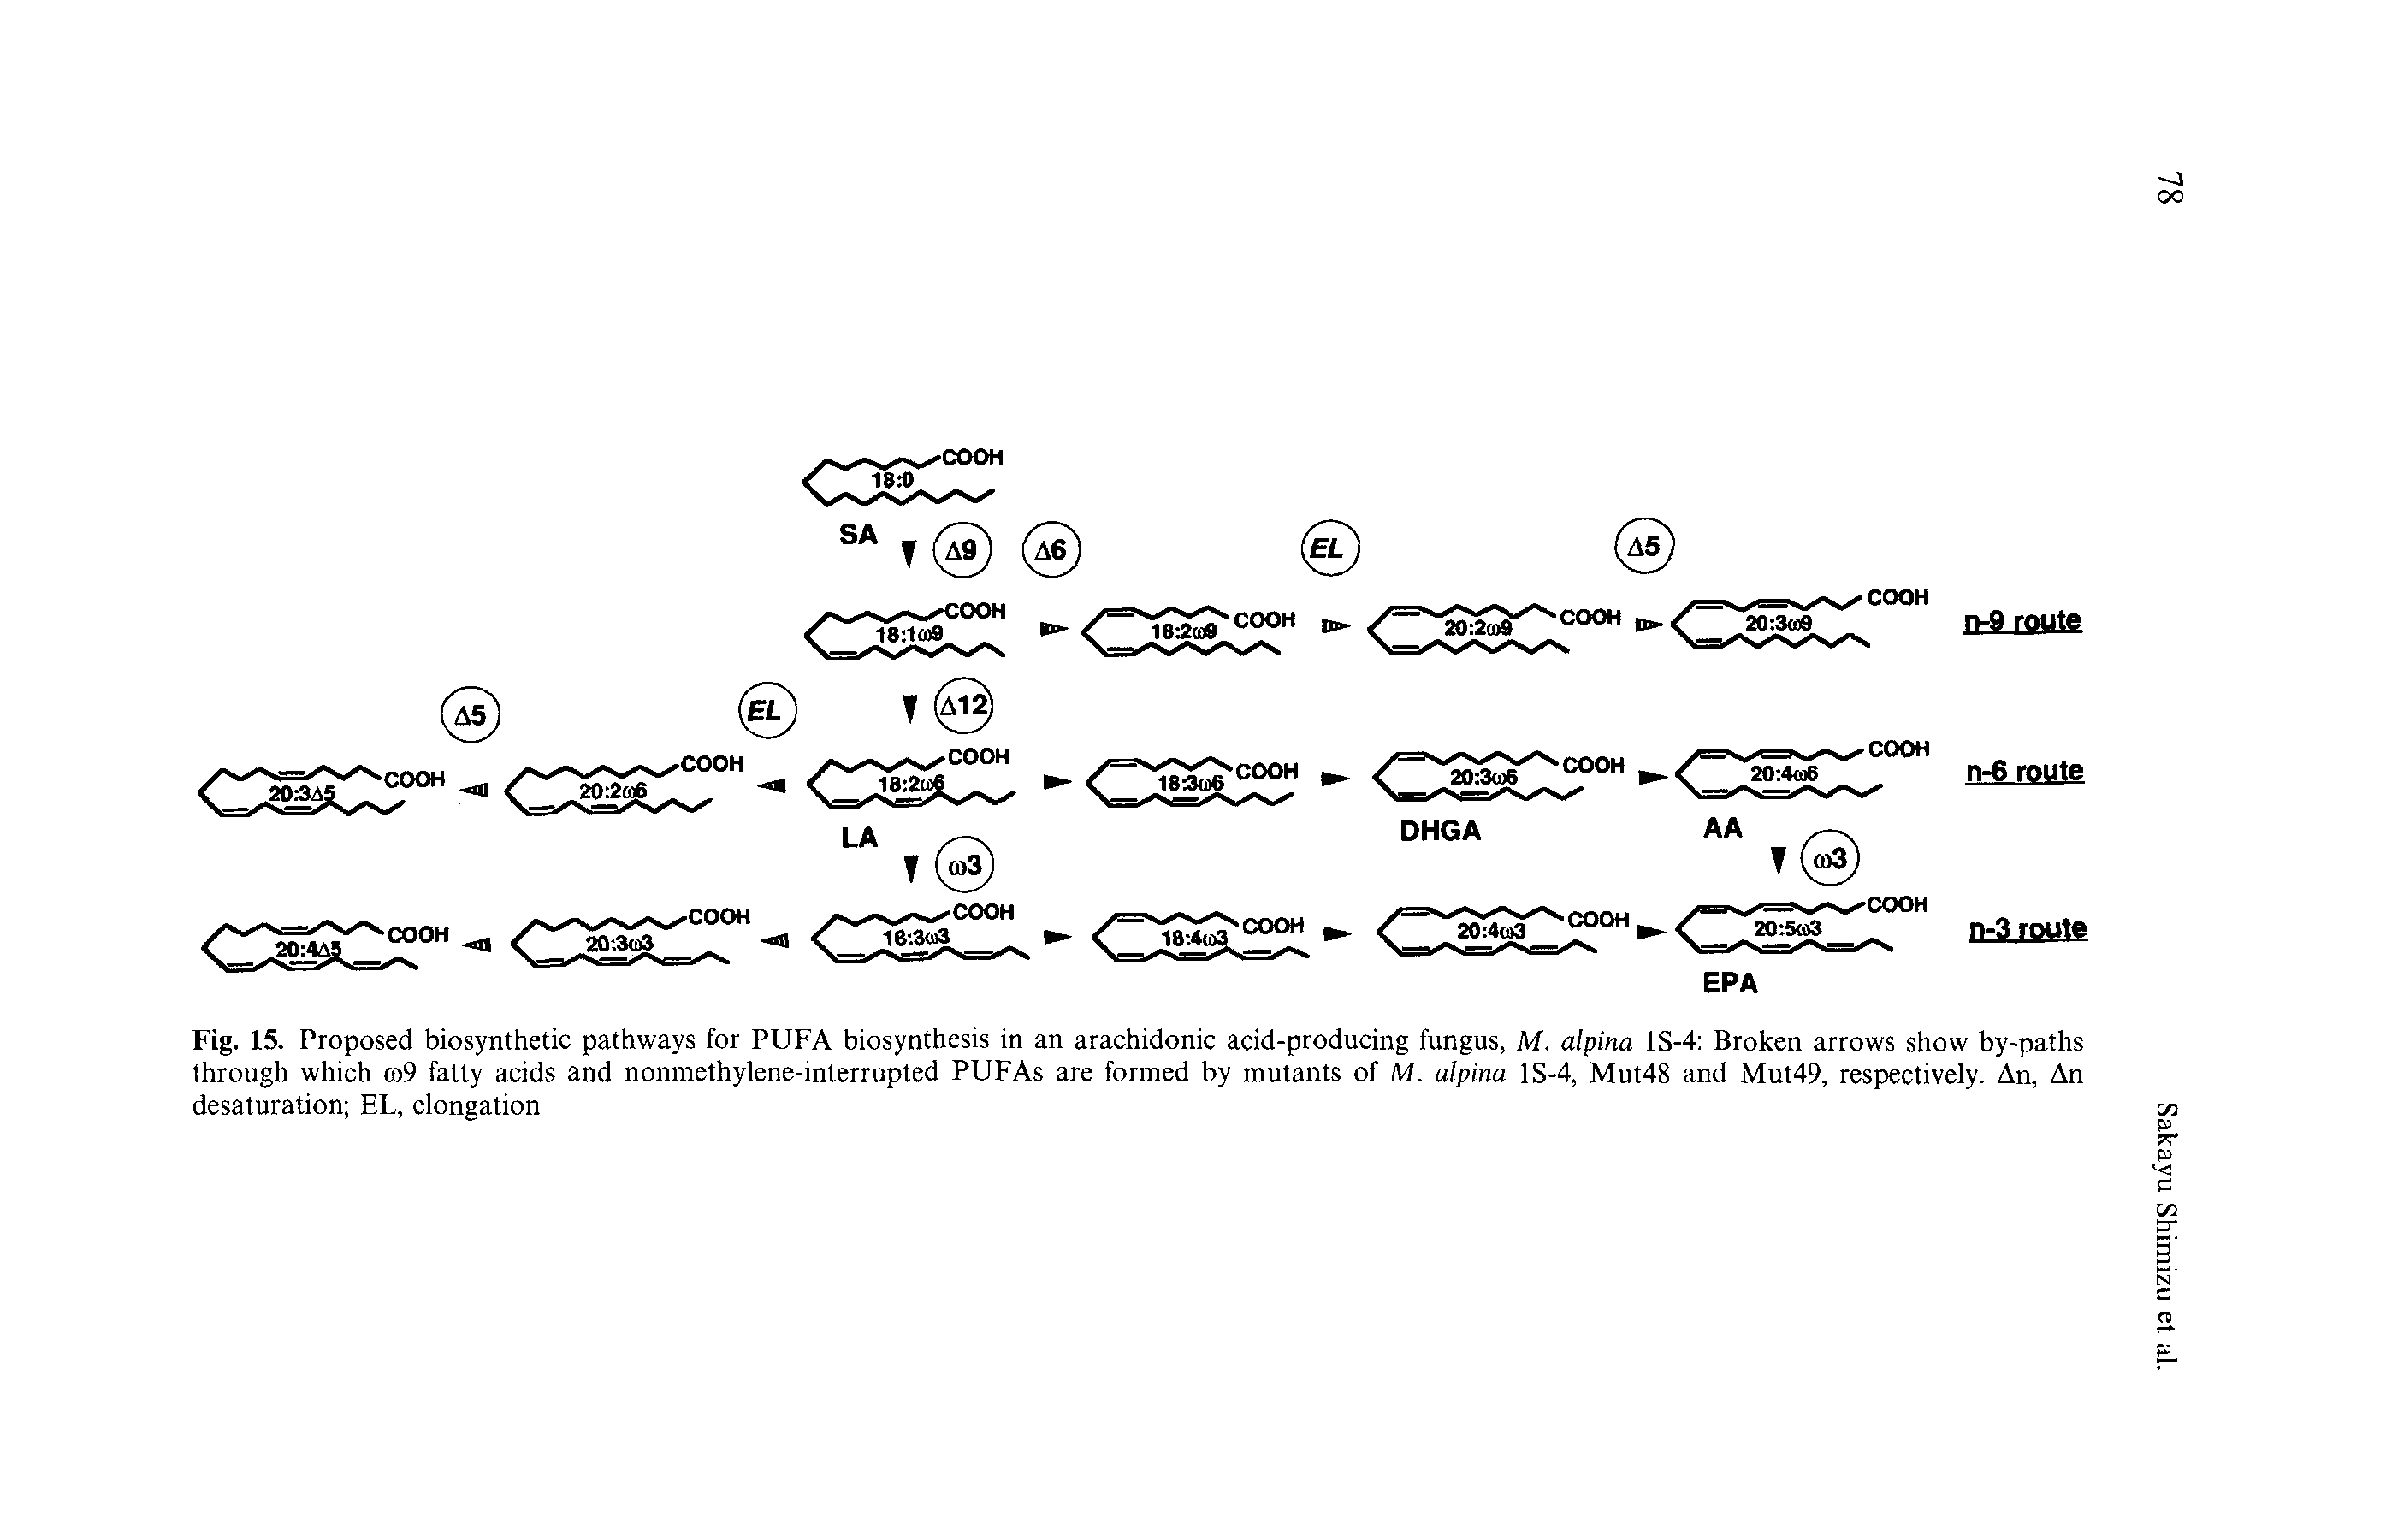 Fig. 15. Proposed biosynthetic pathways for PUFA biosynthesis in an arachidonic acid-producing fungus, M. alpina 1S-4 Broken arrows show by-paths through which co9 fatty acids and nonmethylene-interrupted PUFAs are formed by mutants of M. alpina 1S-4, Mut48 and Mut49, respectively. An, An desaturation EL, elongation...